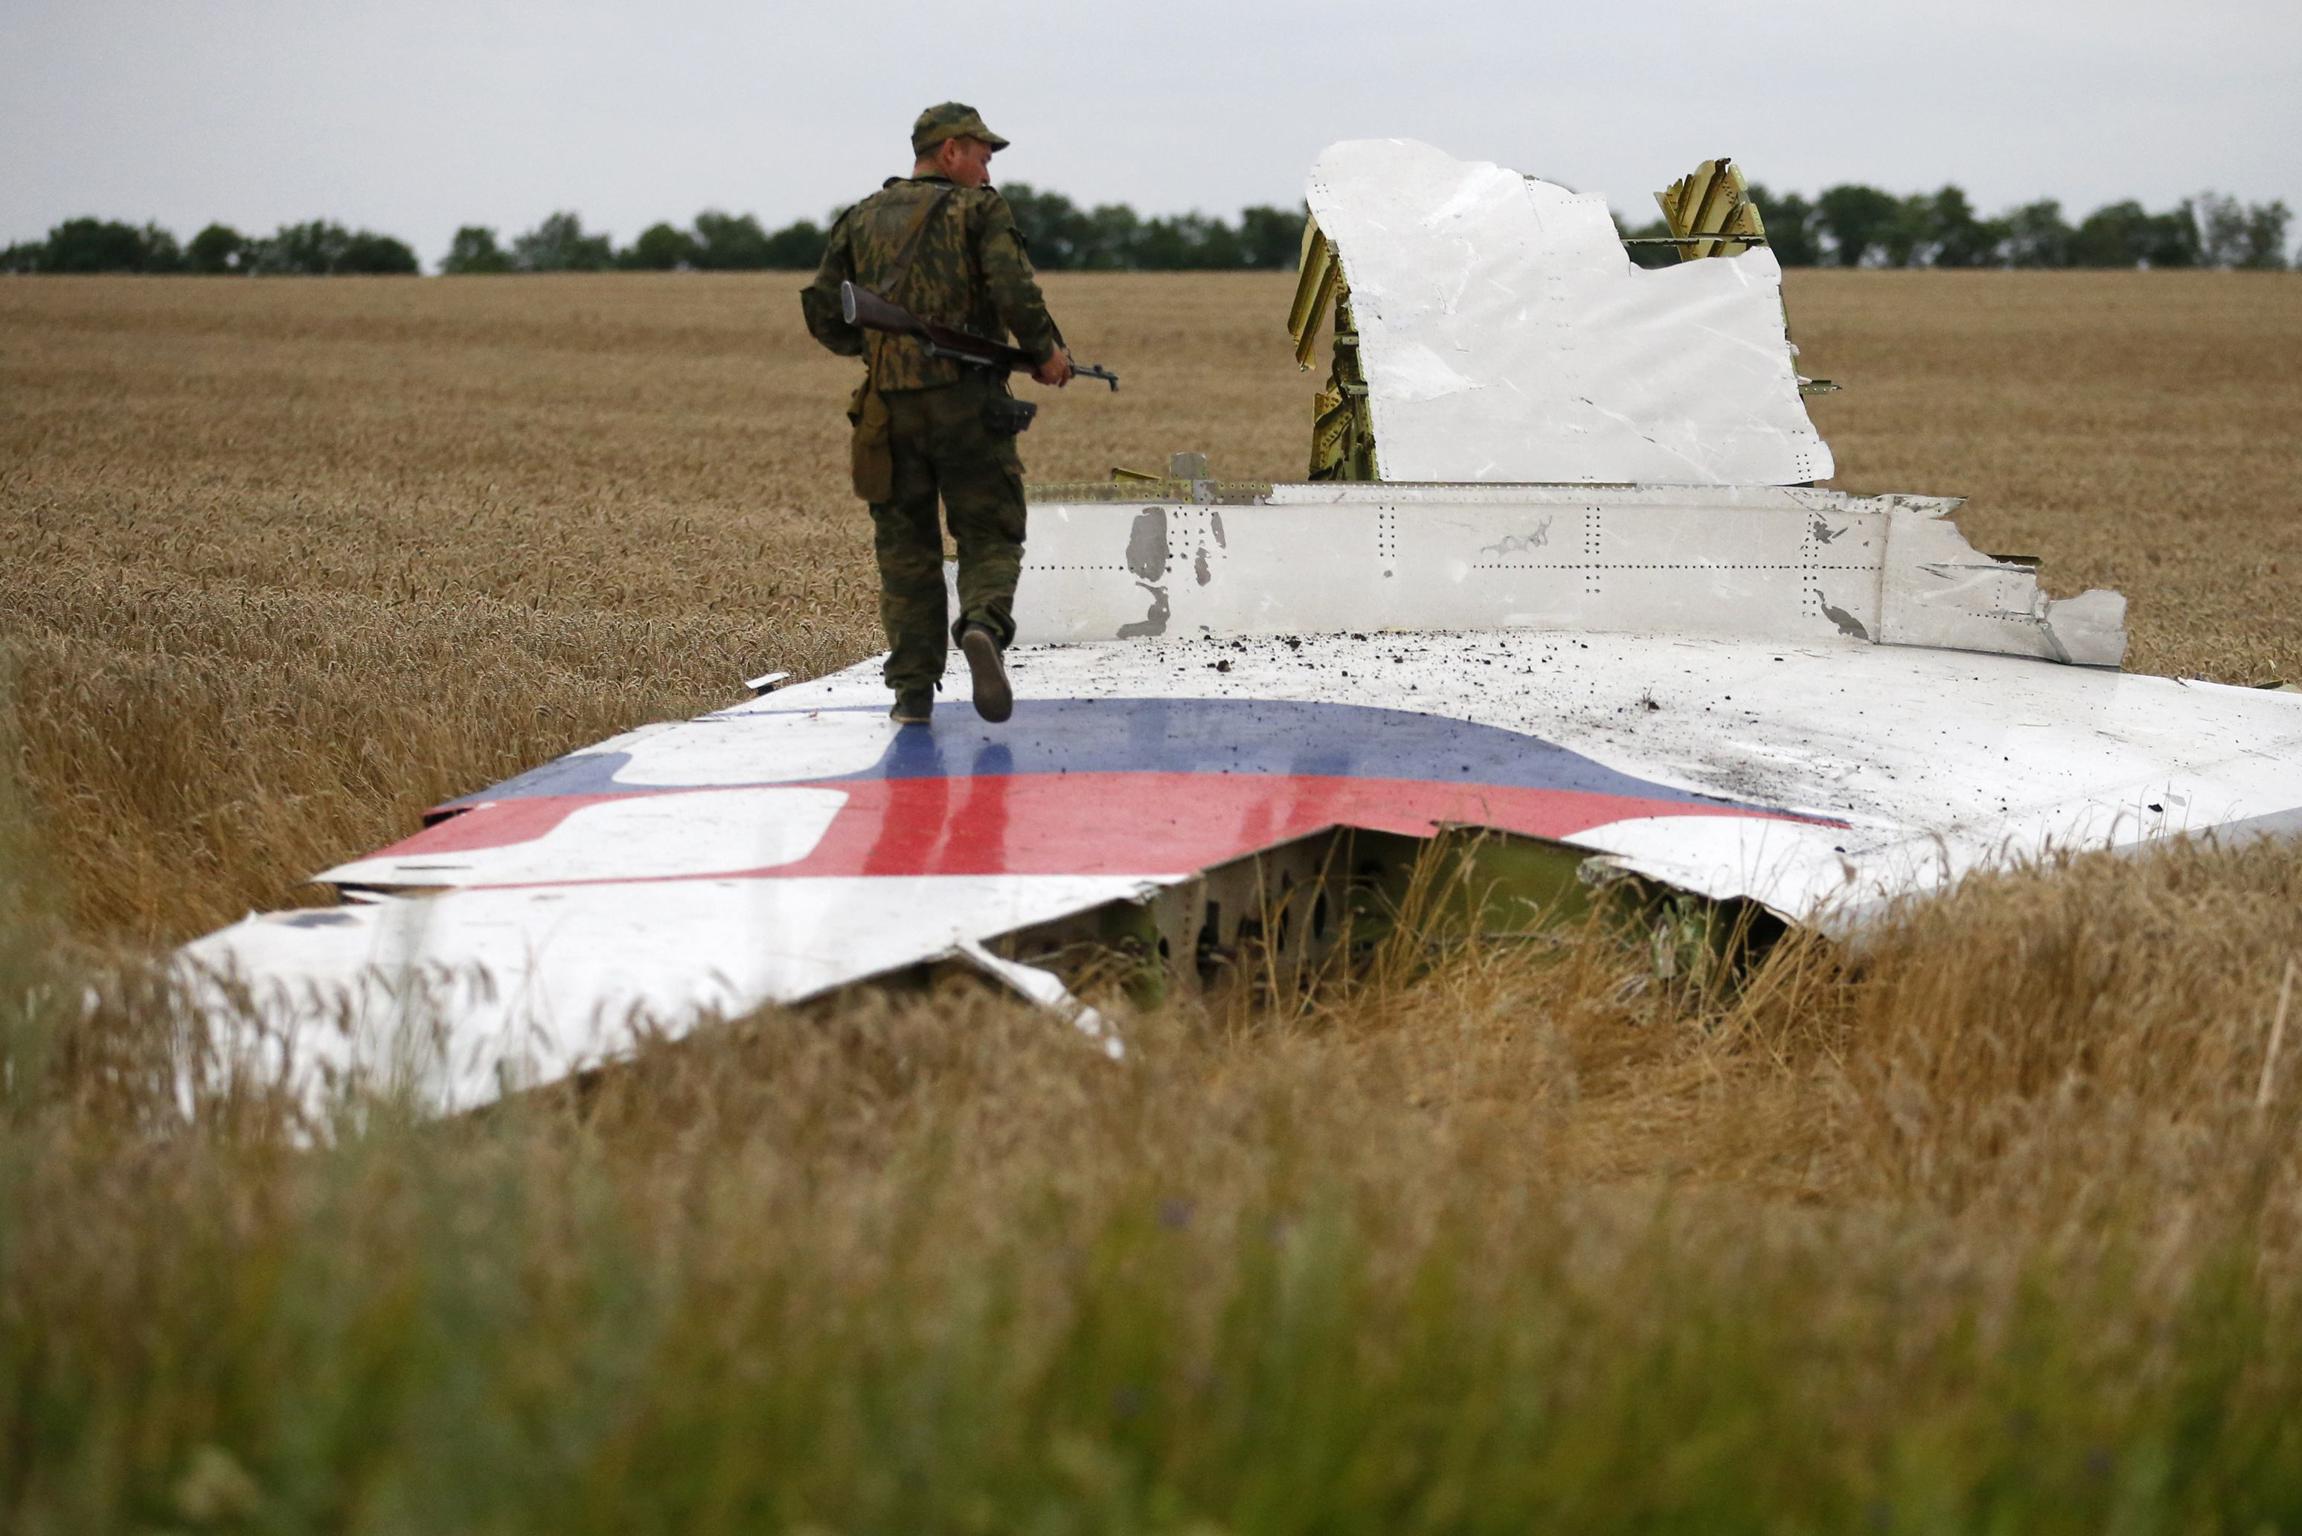 The Dutch public prosecutor’s office will not appeal in the MH17 criminal case